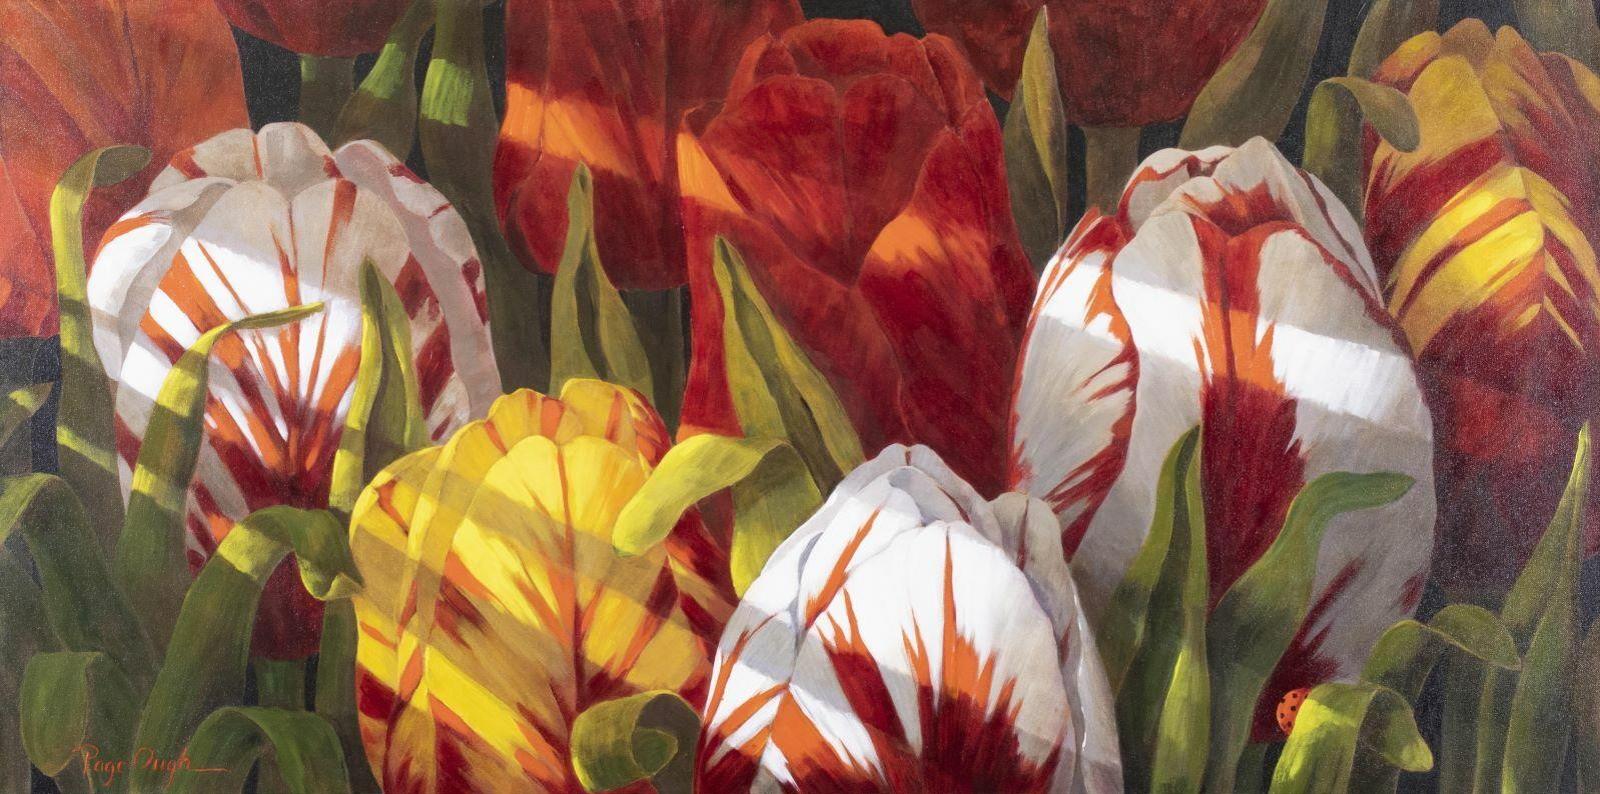 Page Ough (1946) - Morning Light On Tulips